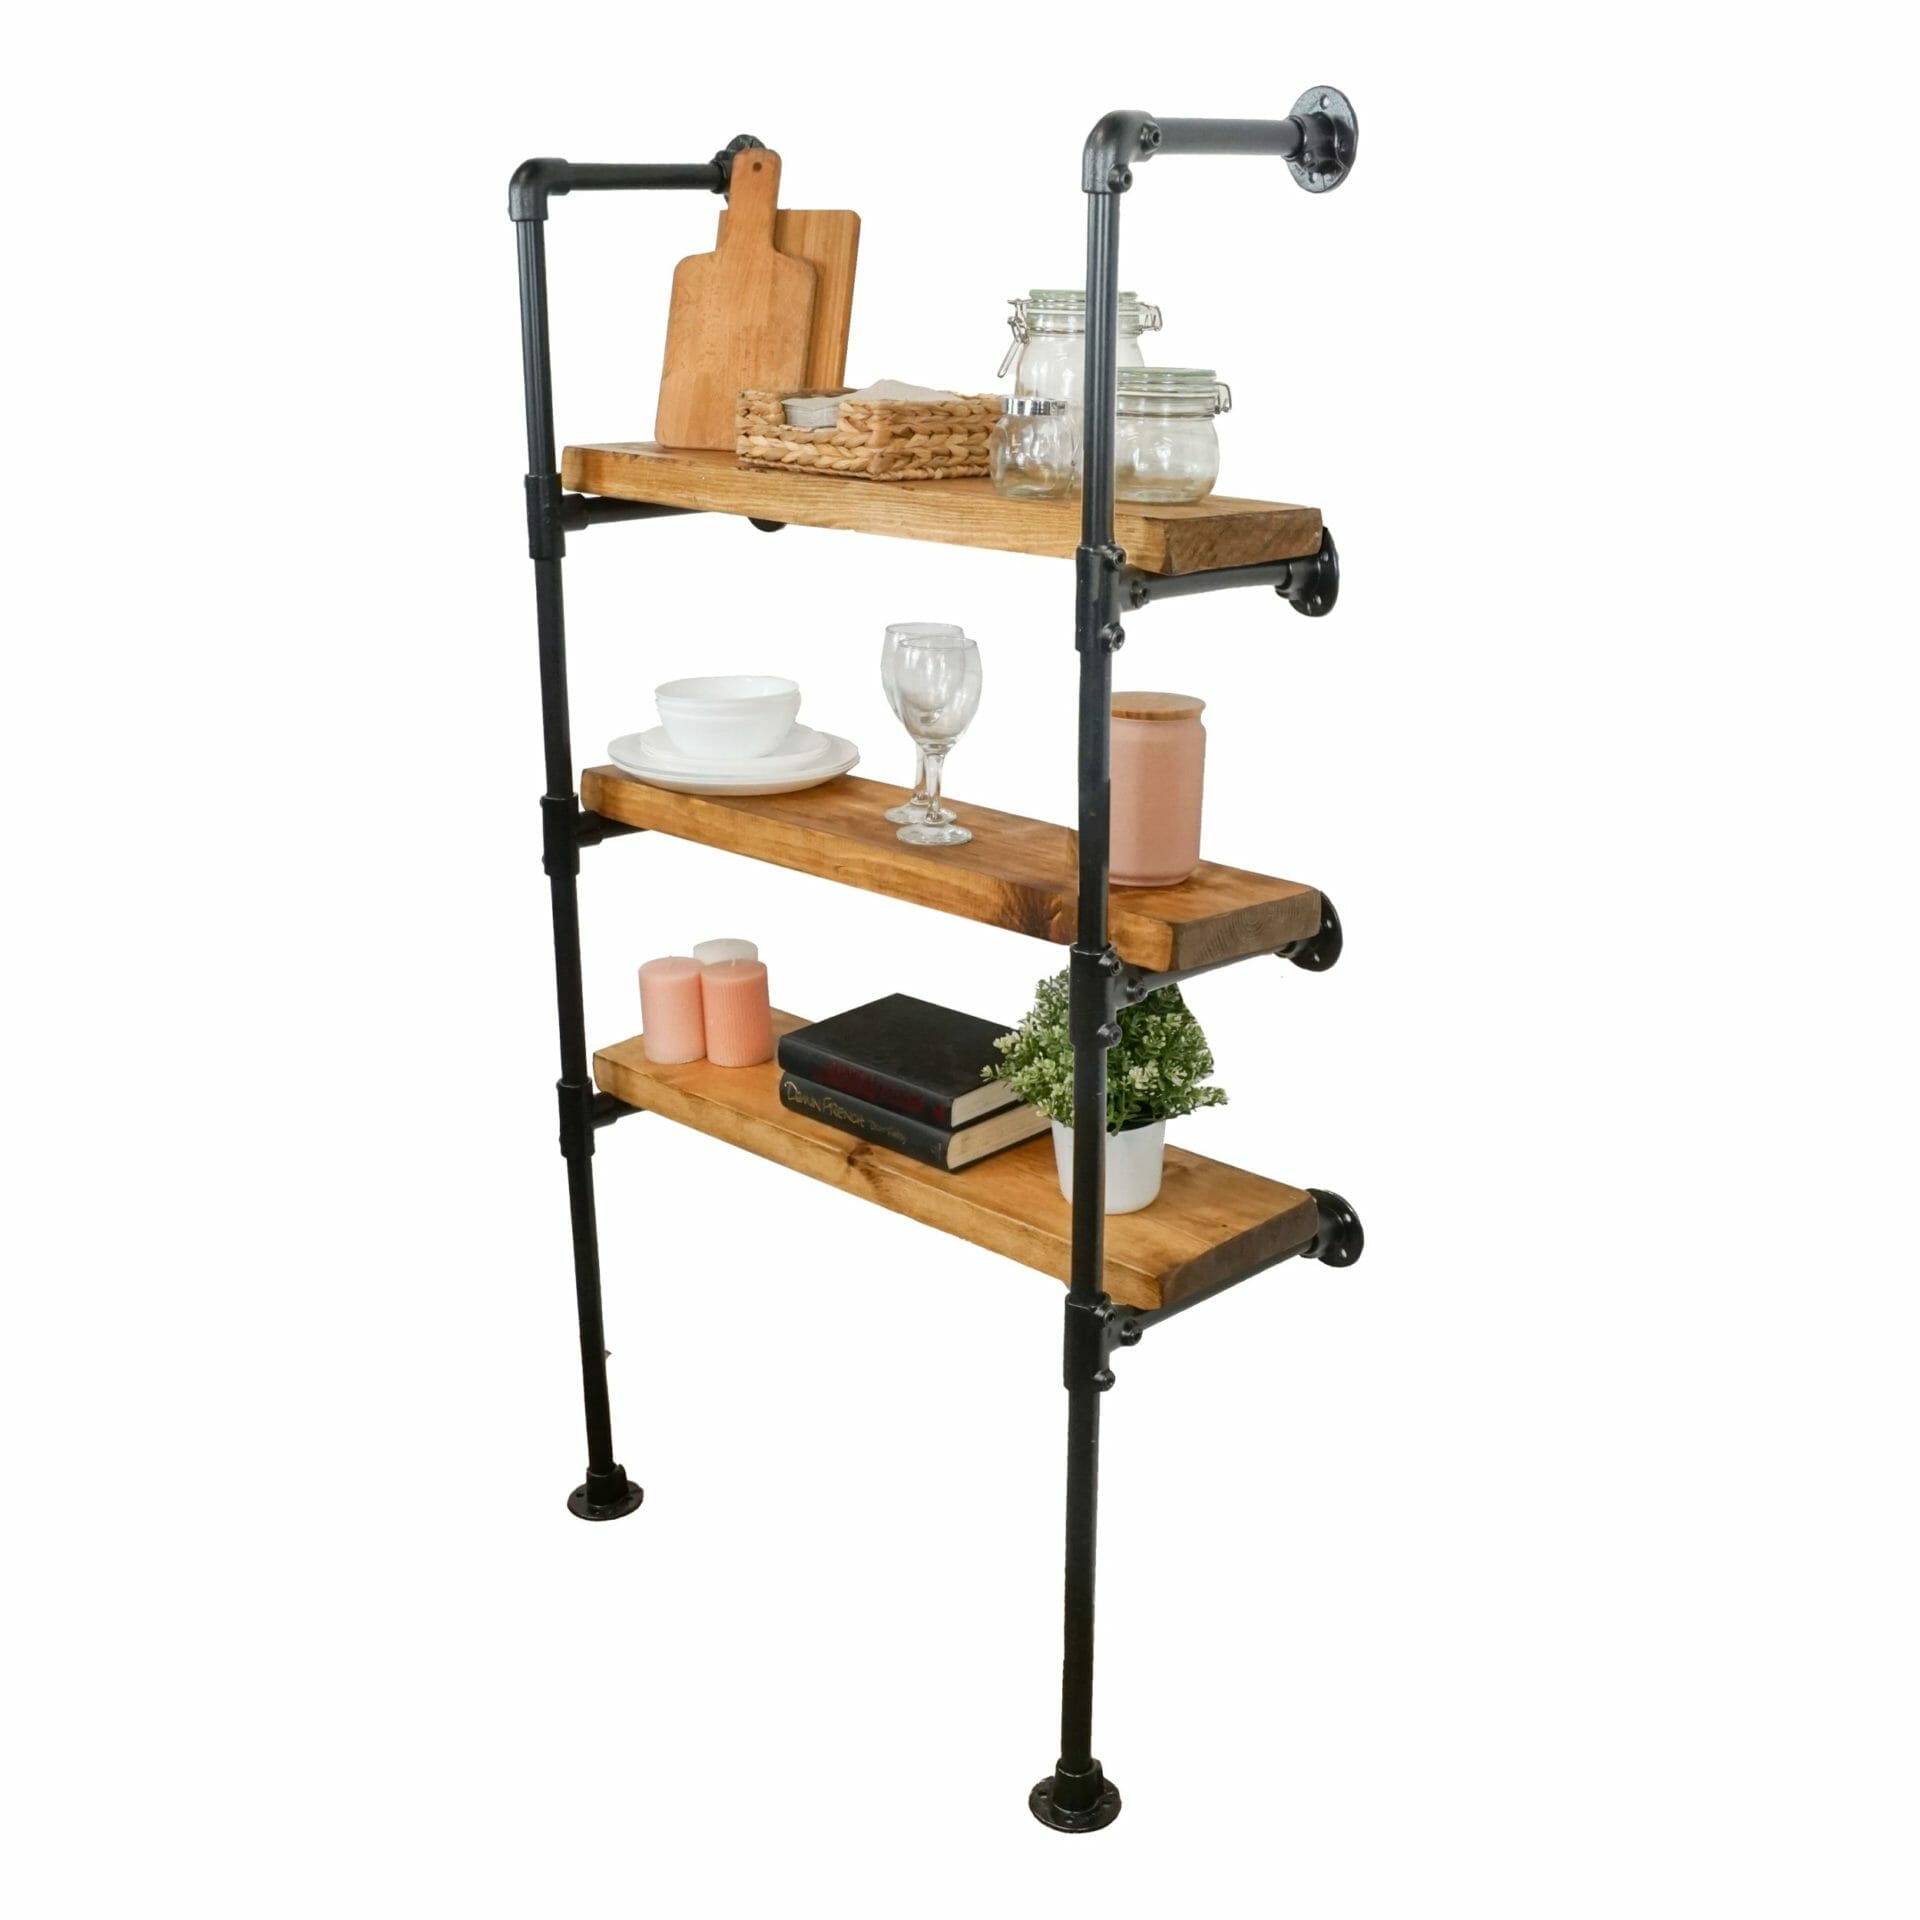 key clamp shelving unit wall and floor mounted reclaimed timber